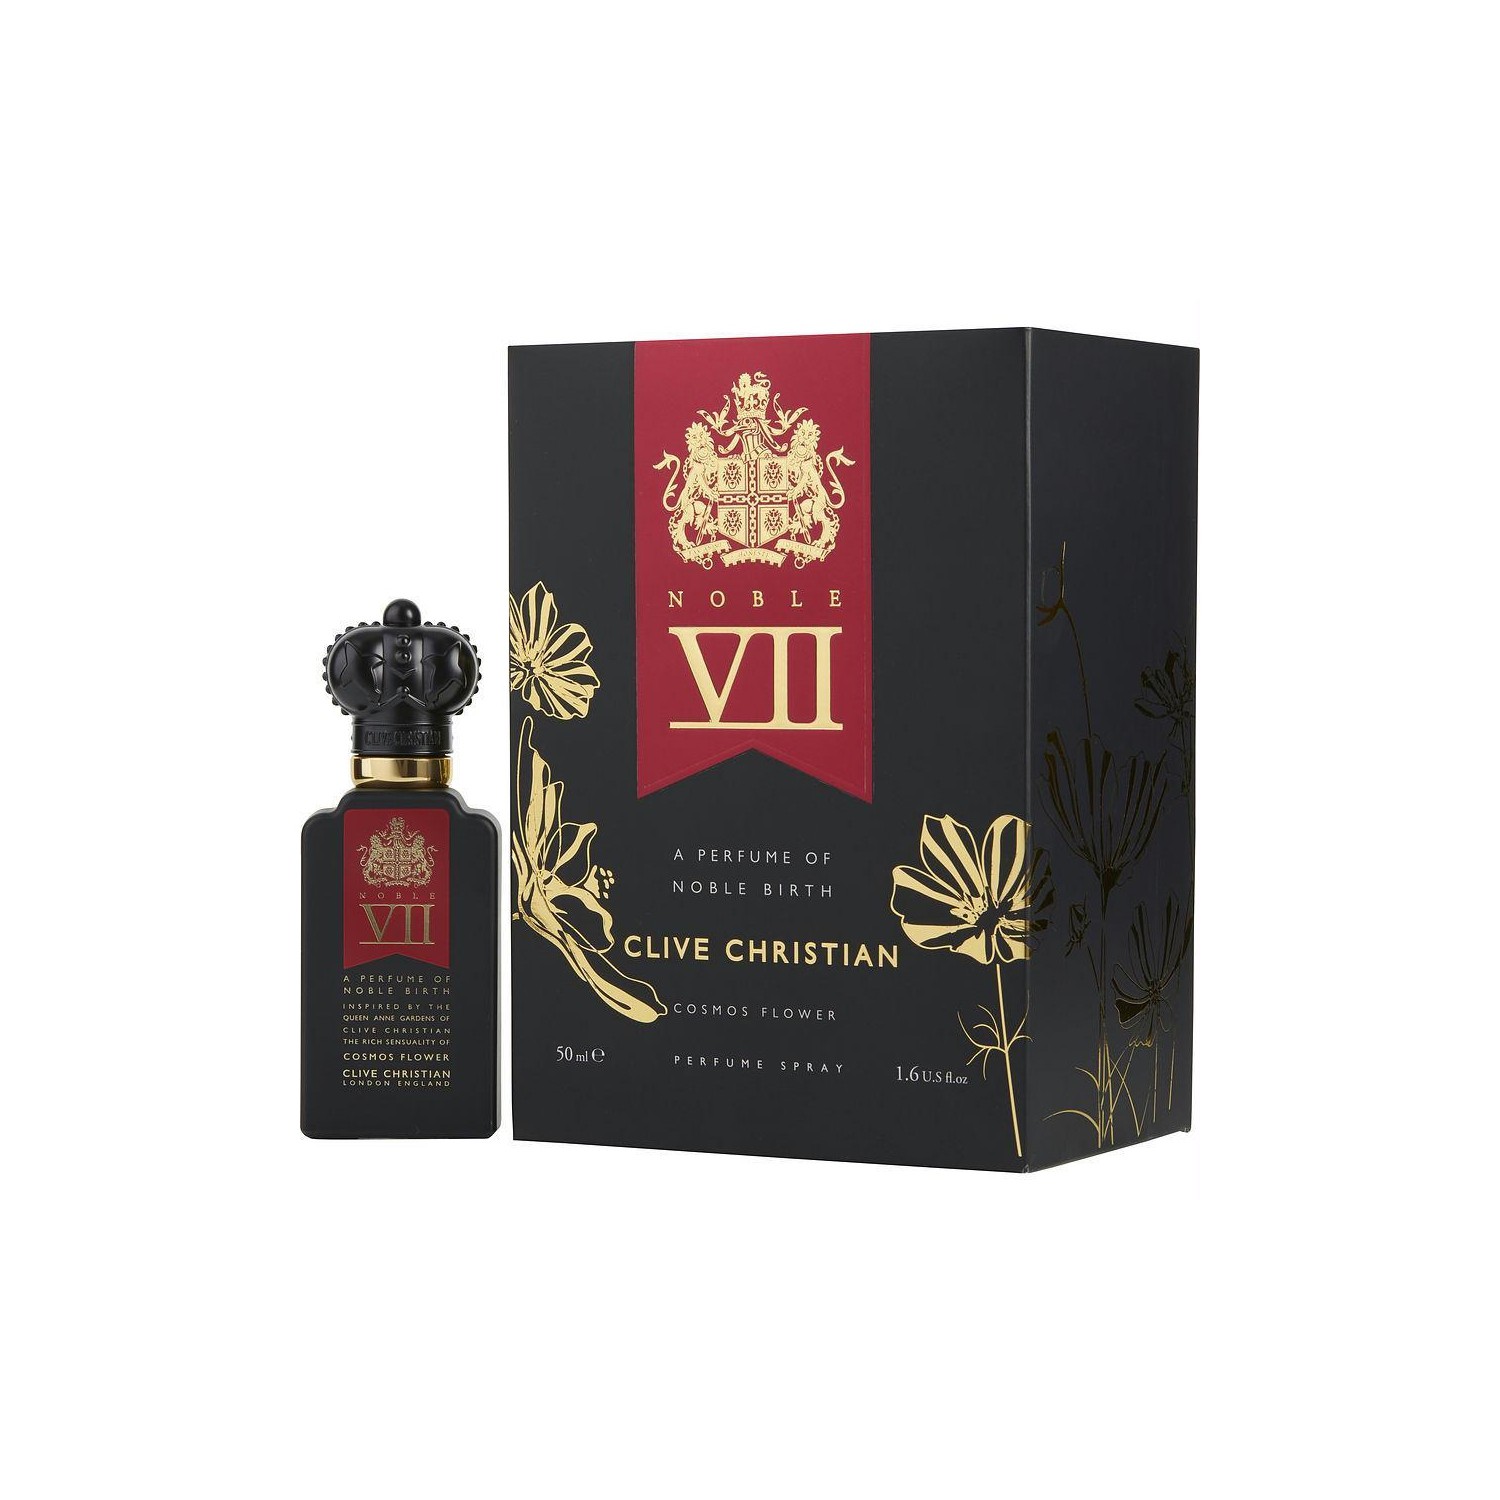 Clive Christian Noble Vii Cosmos Flower By Clive Christian Perfume Spray 1.6 Oz